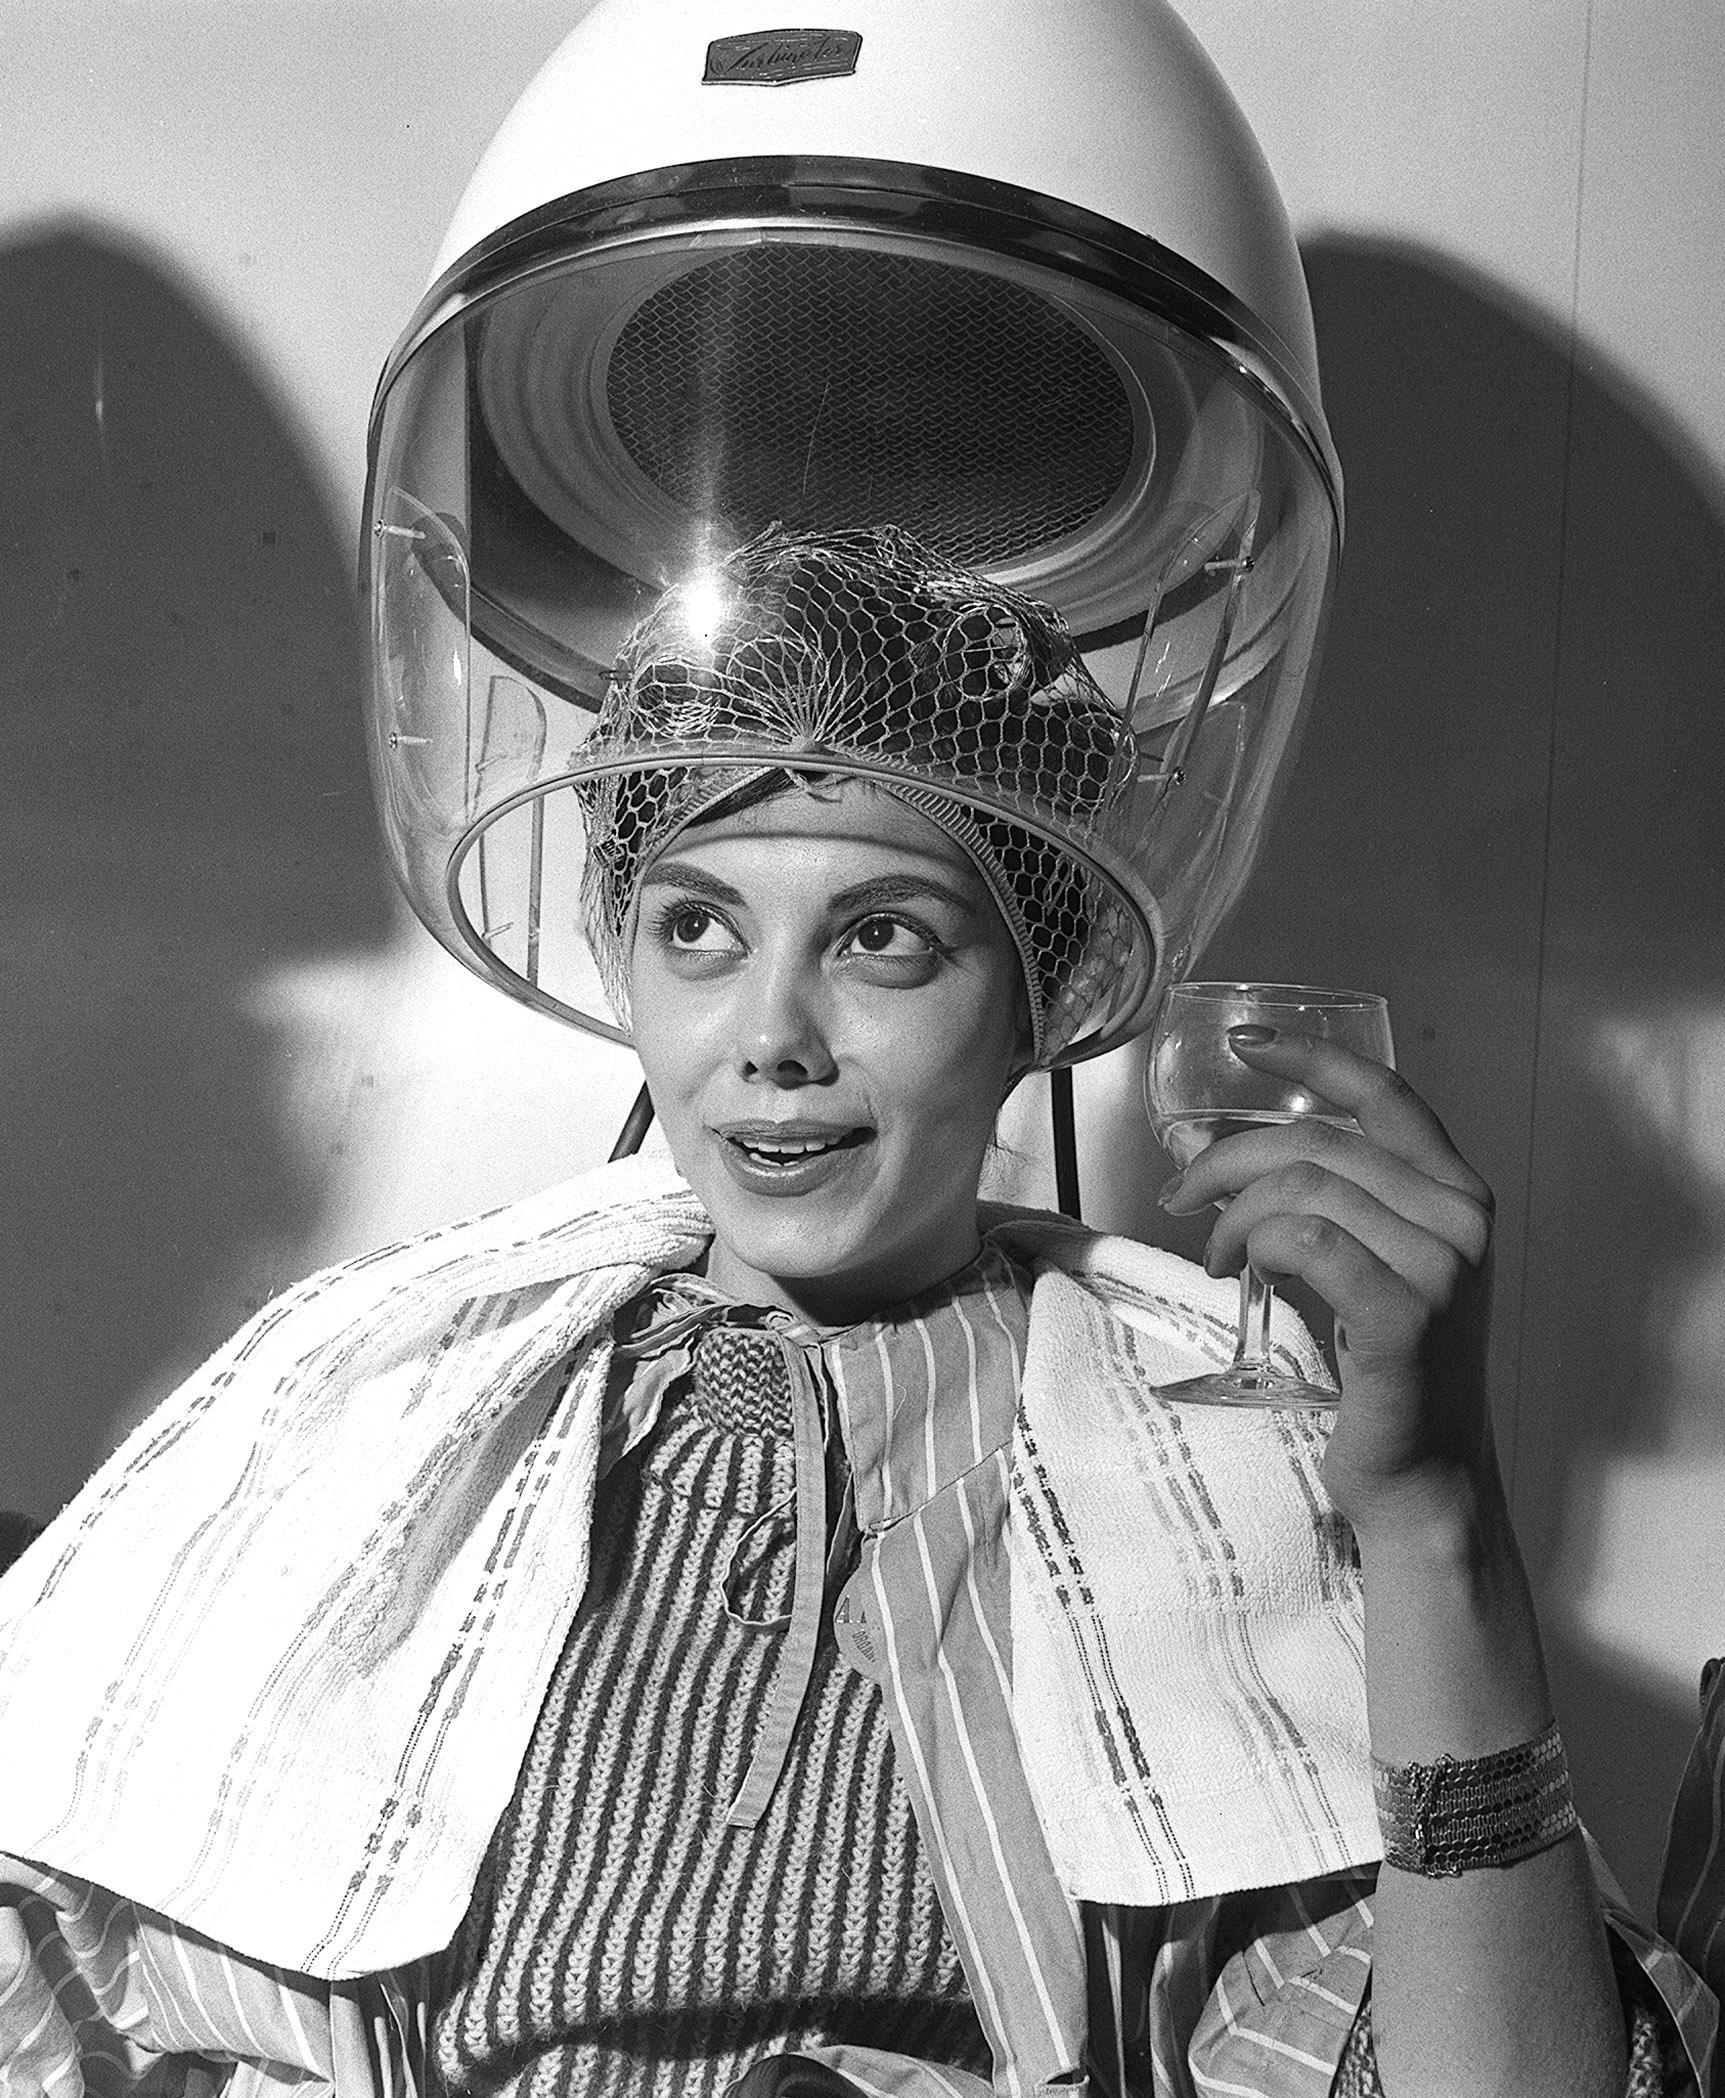 Life In The Barber's Shop And Salon: British Hairdressing 